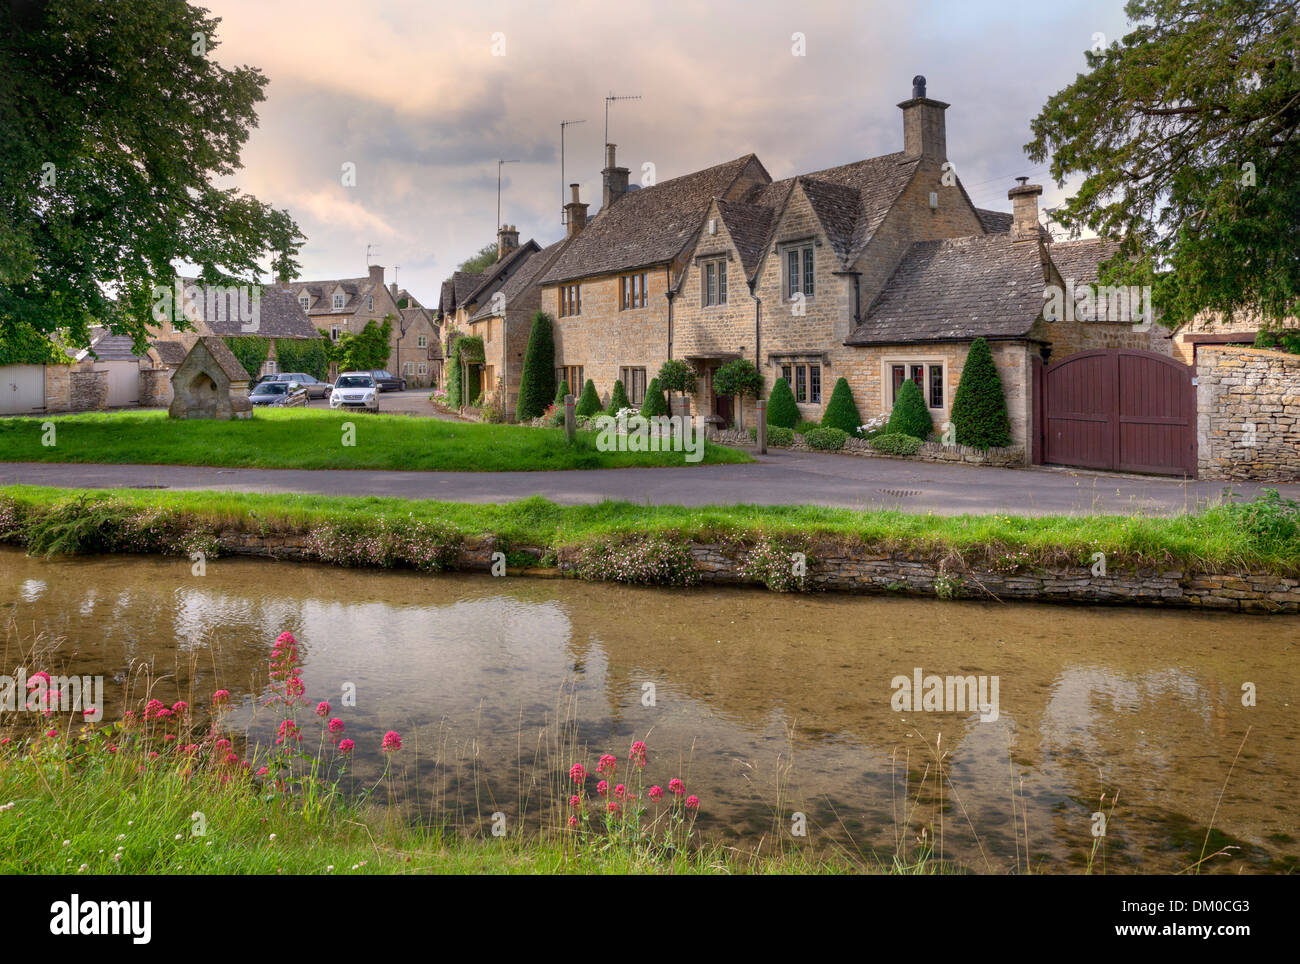 Cottages at Lower Slaughter, Gloucestershire, Angleterre. Banque D'Images